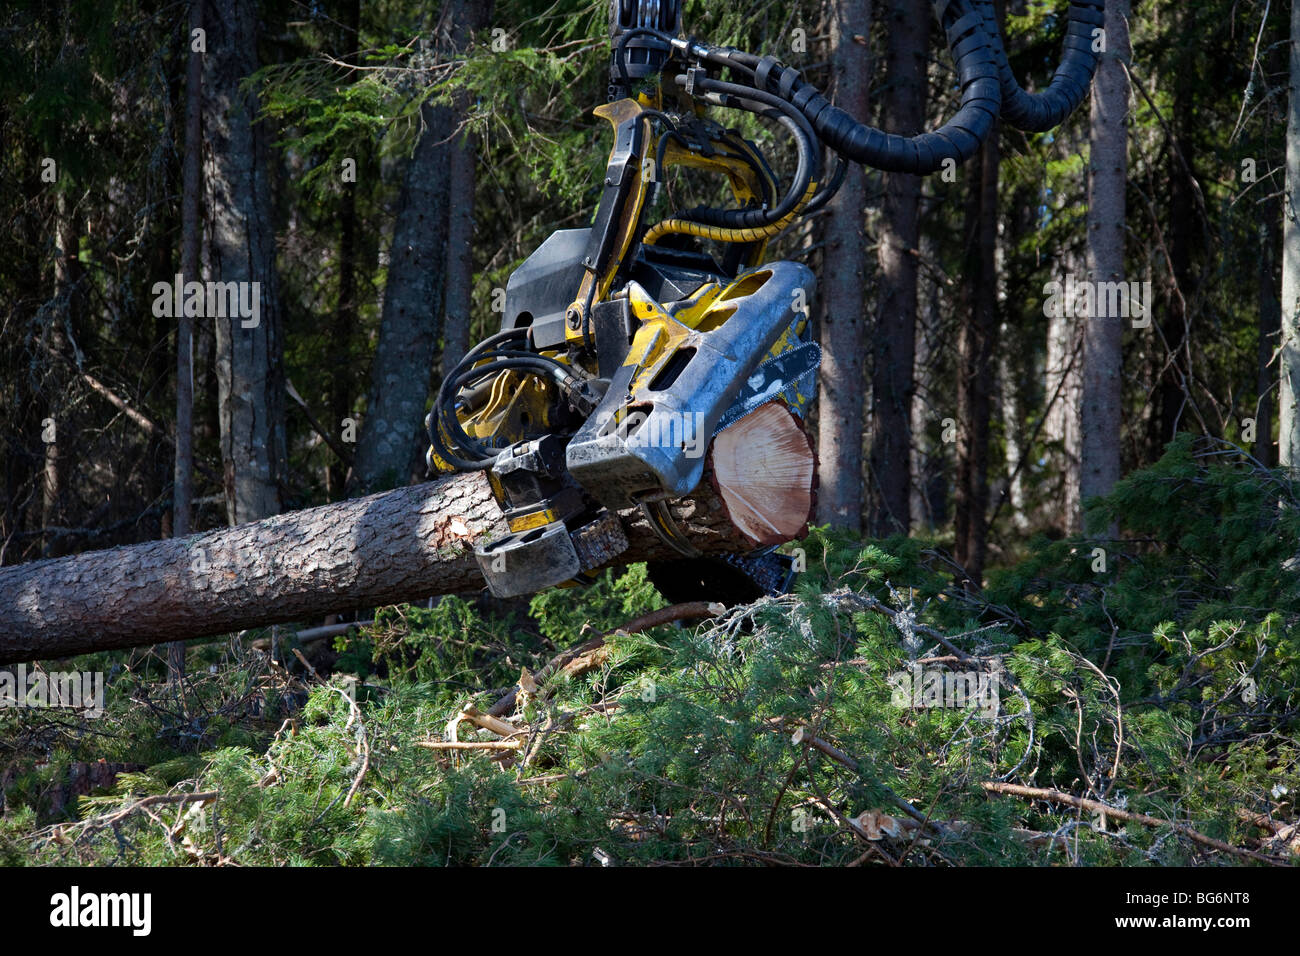 Logging industry showing timber / trees felled by forestry machinery / Timberjack harvester in pine forest Stock Photo